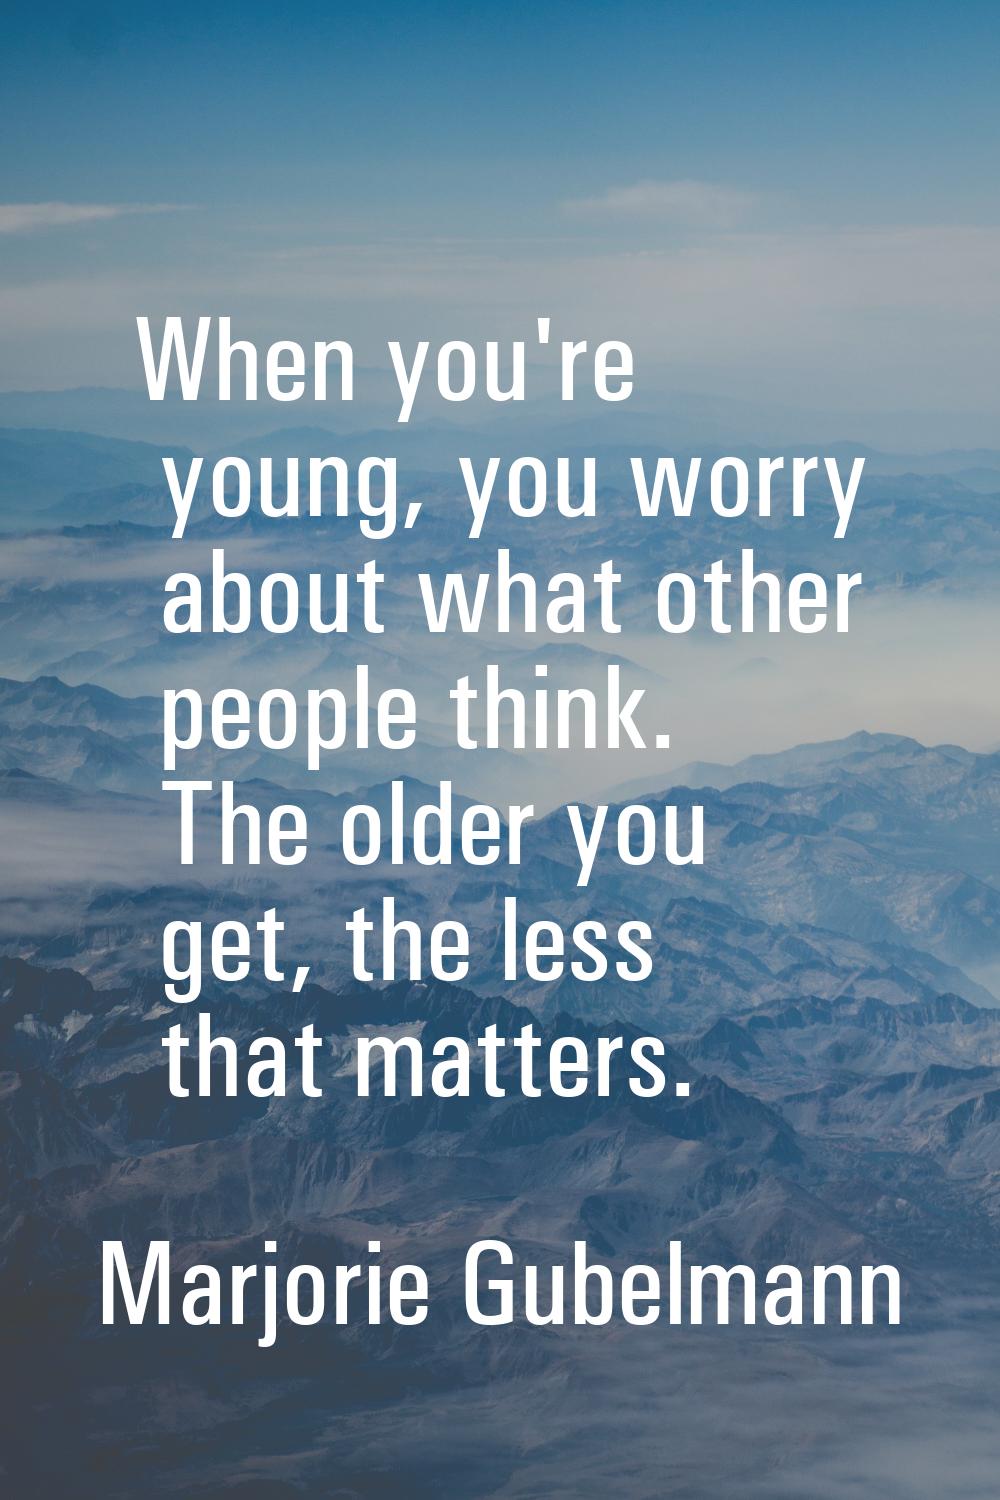 When you're young, you worry about what other people think. The older you get, the less that matter